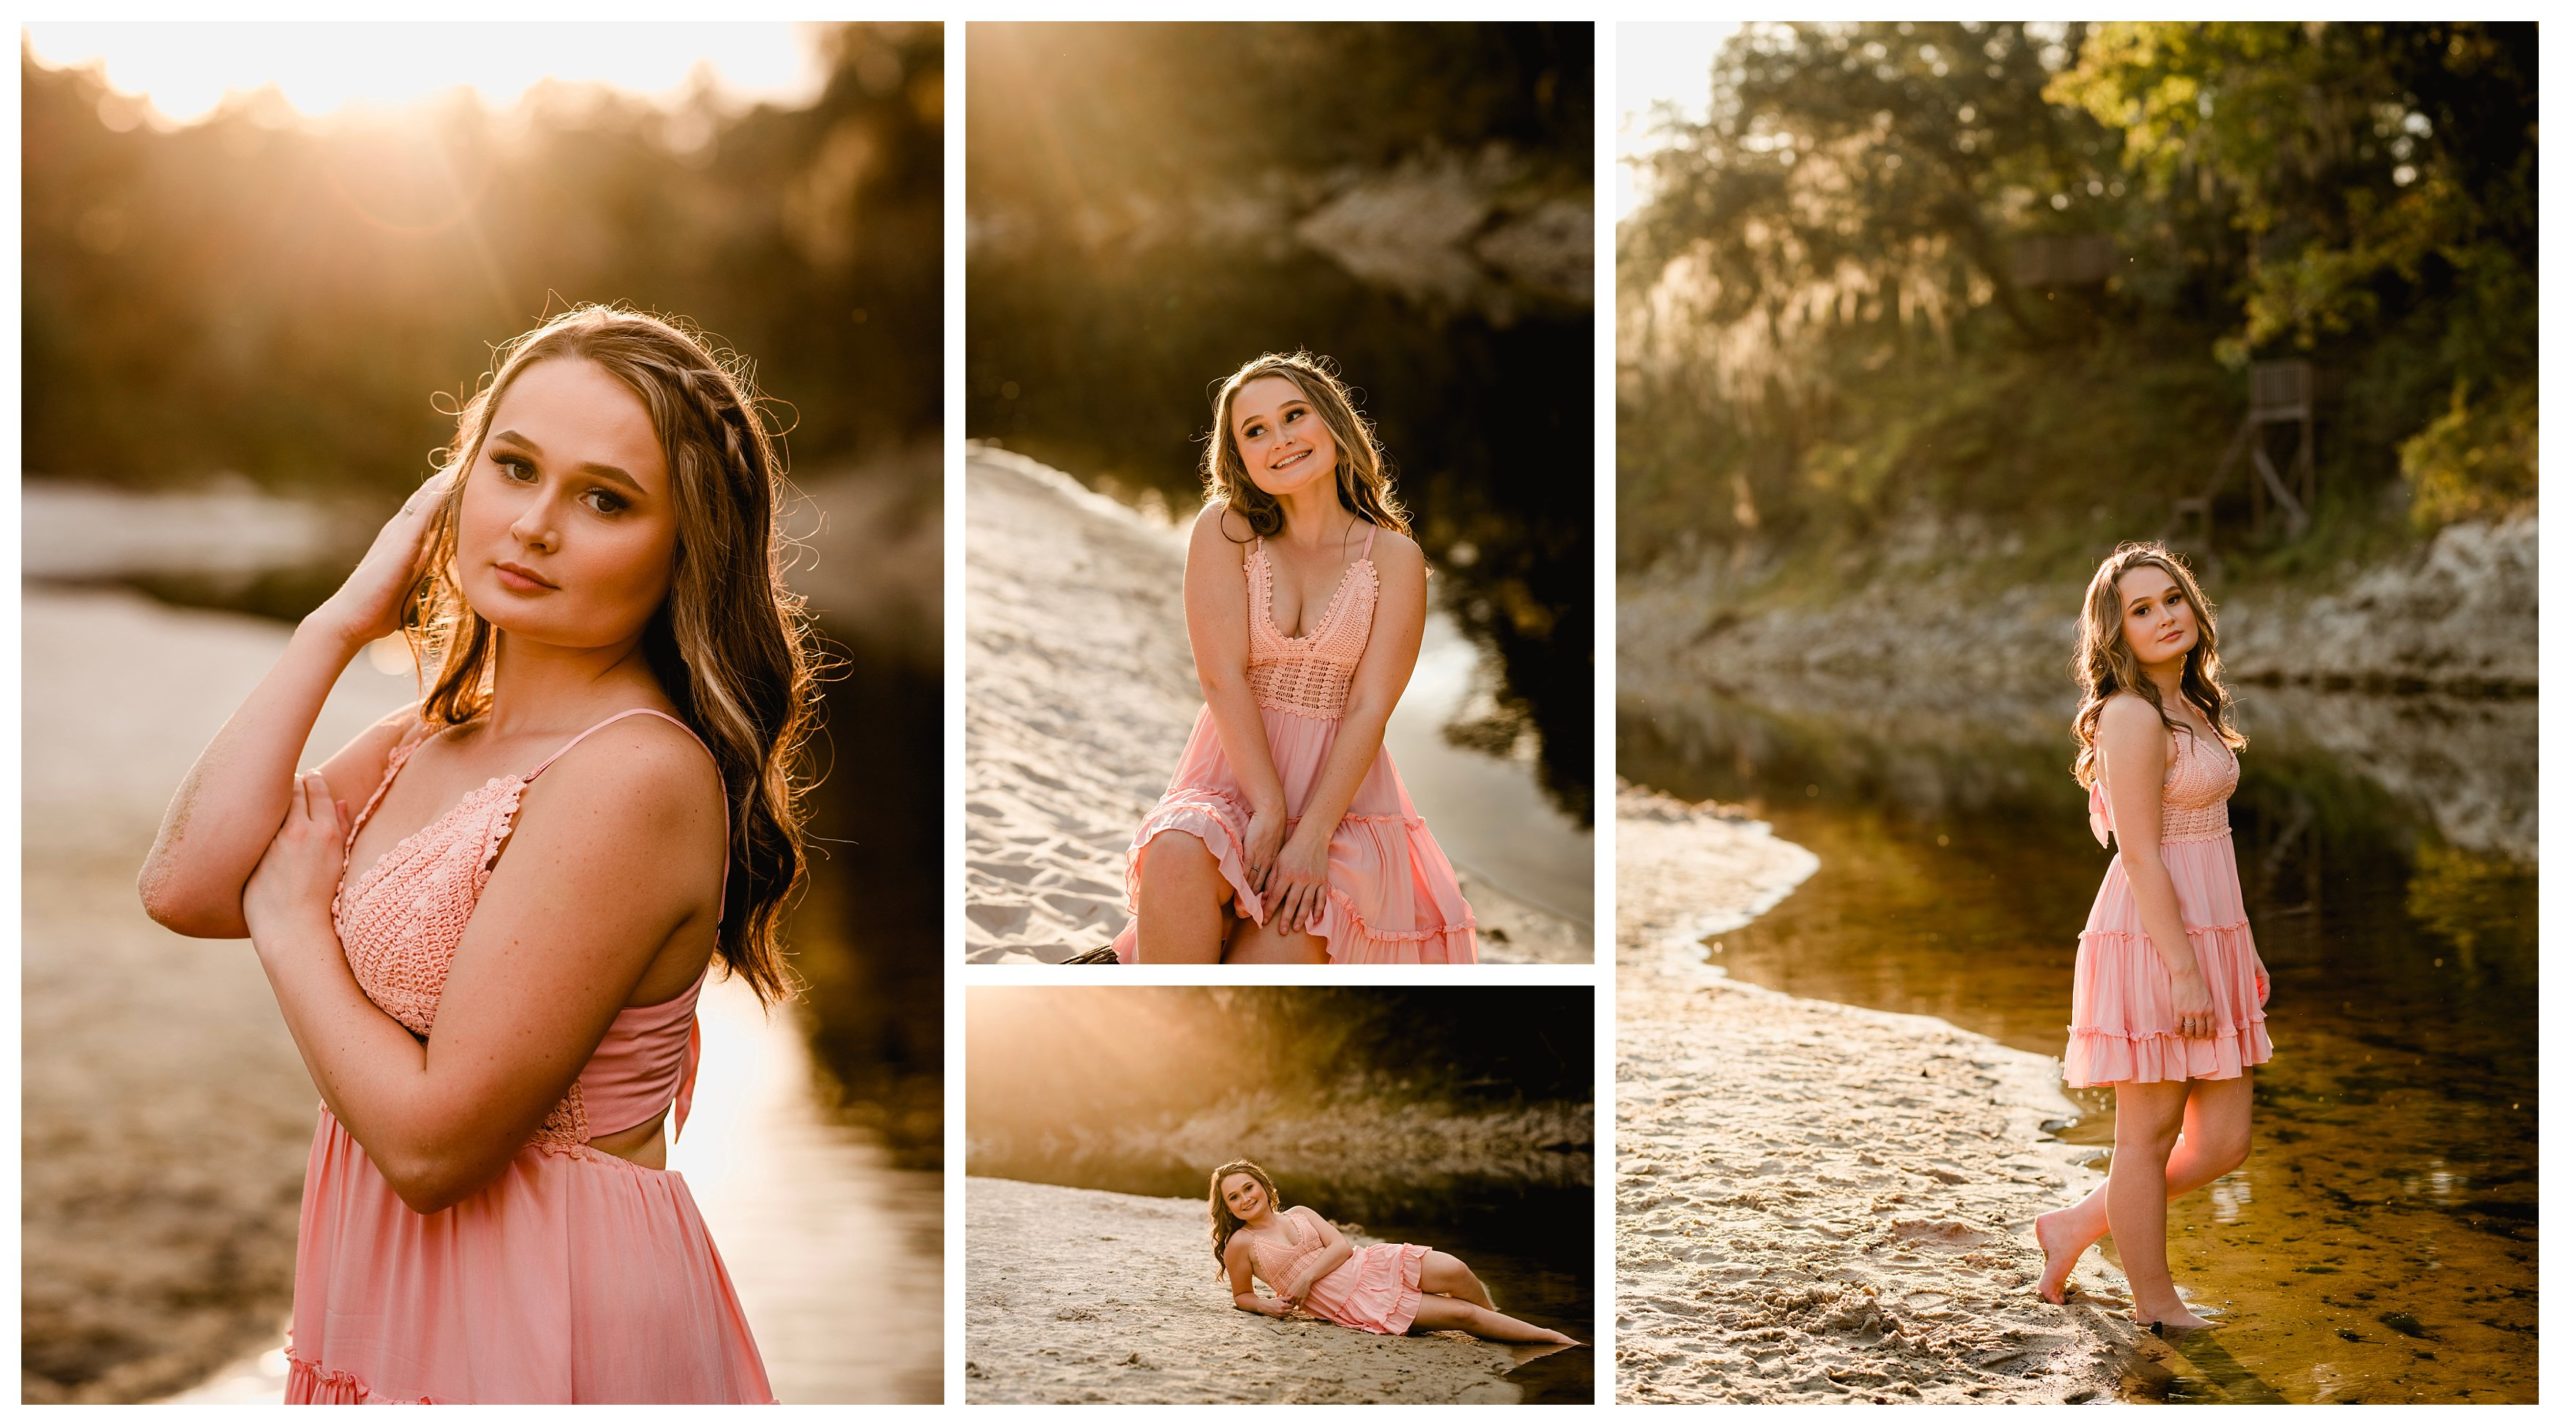 Natural senior posing ideas for river photos taken at the Suwannee river in Florida.